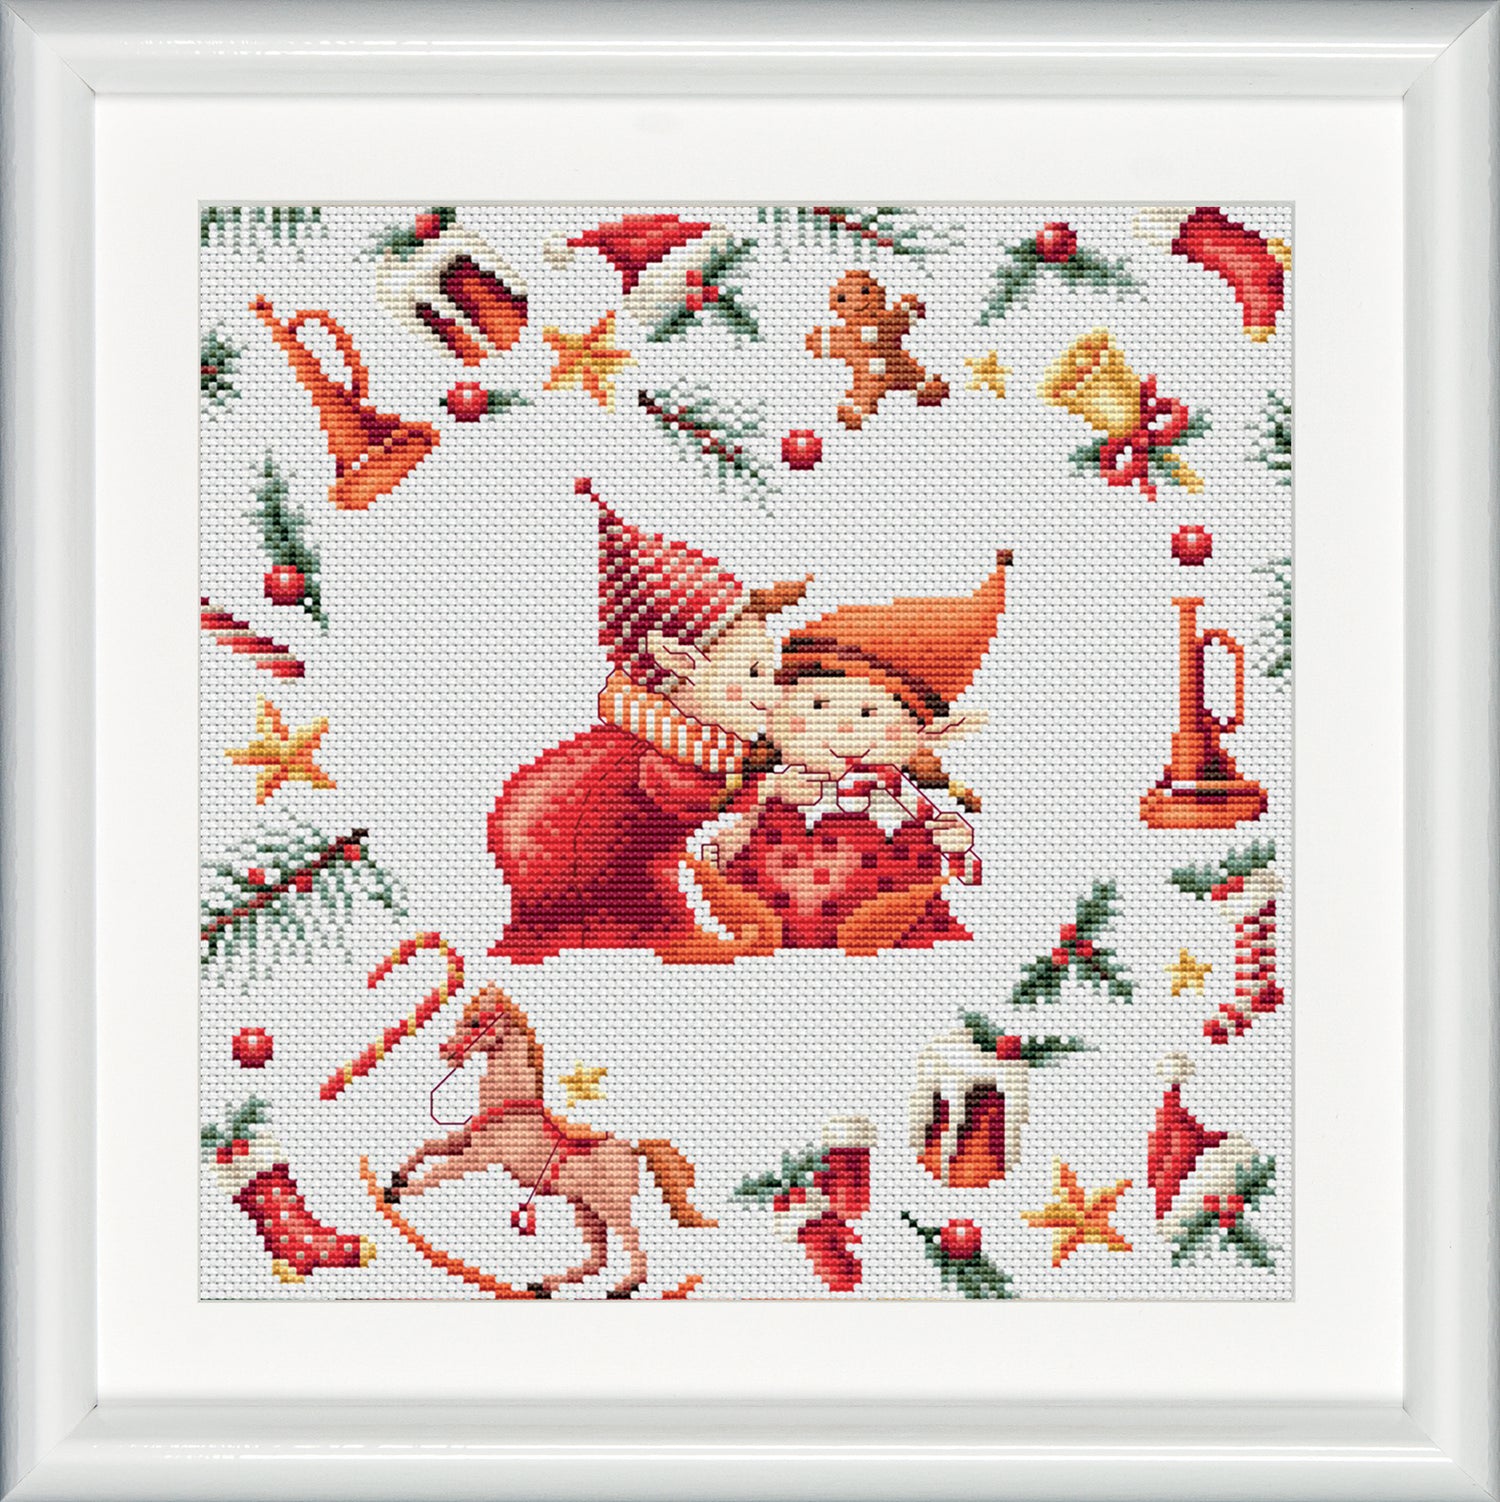 Three lovely embroidery designs of Christmas elves. In this third design you see two elves in love. They are surrounded by Christmas decoration which create the shape of a heart. DSB cross stitch kits have easy to follow design charts and contain all items needed. To cater to both beginners as well as advanced stitching artists.